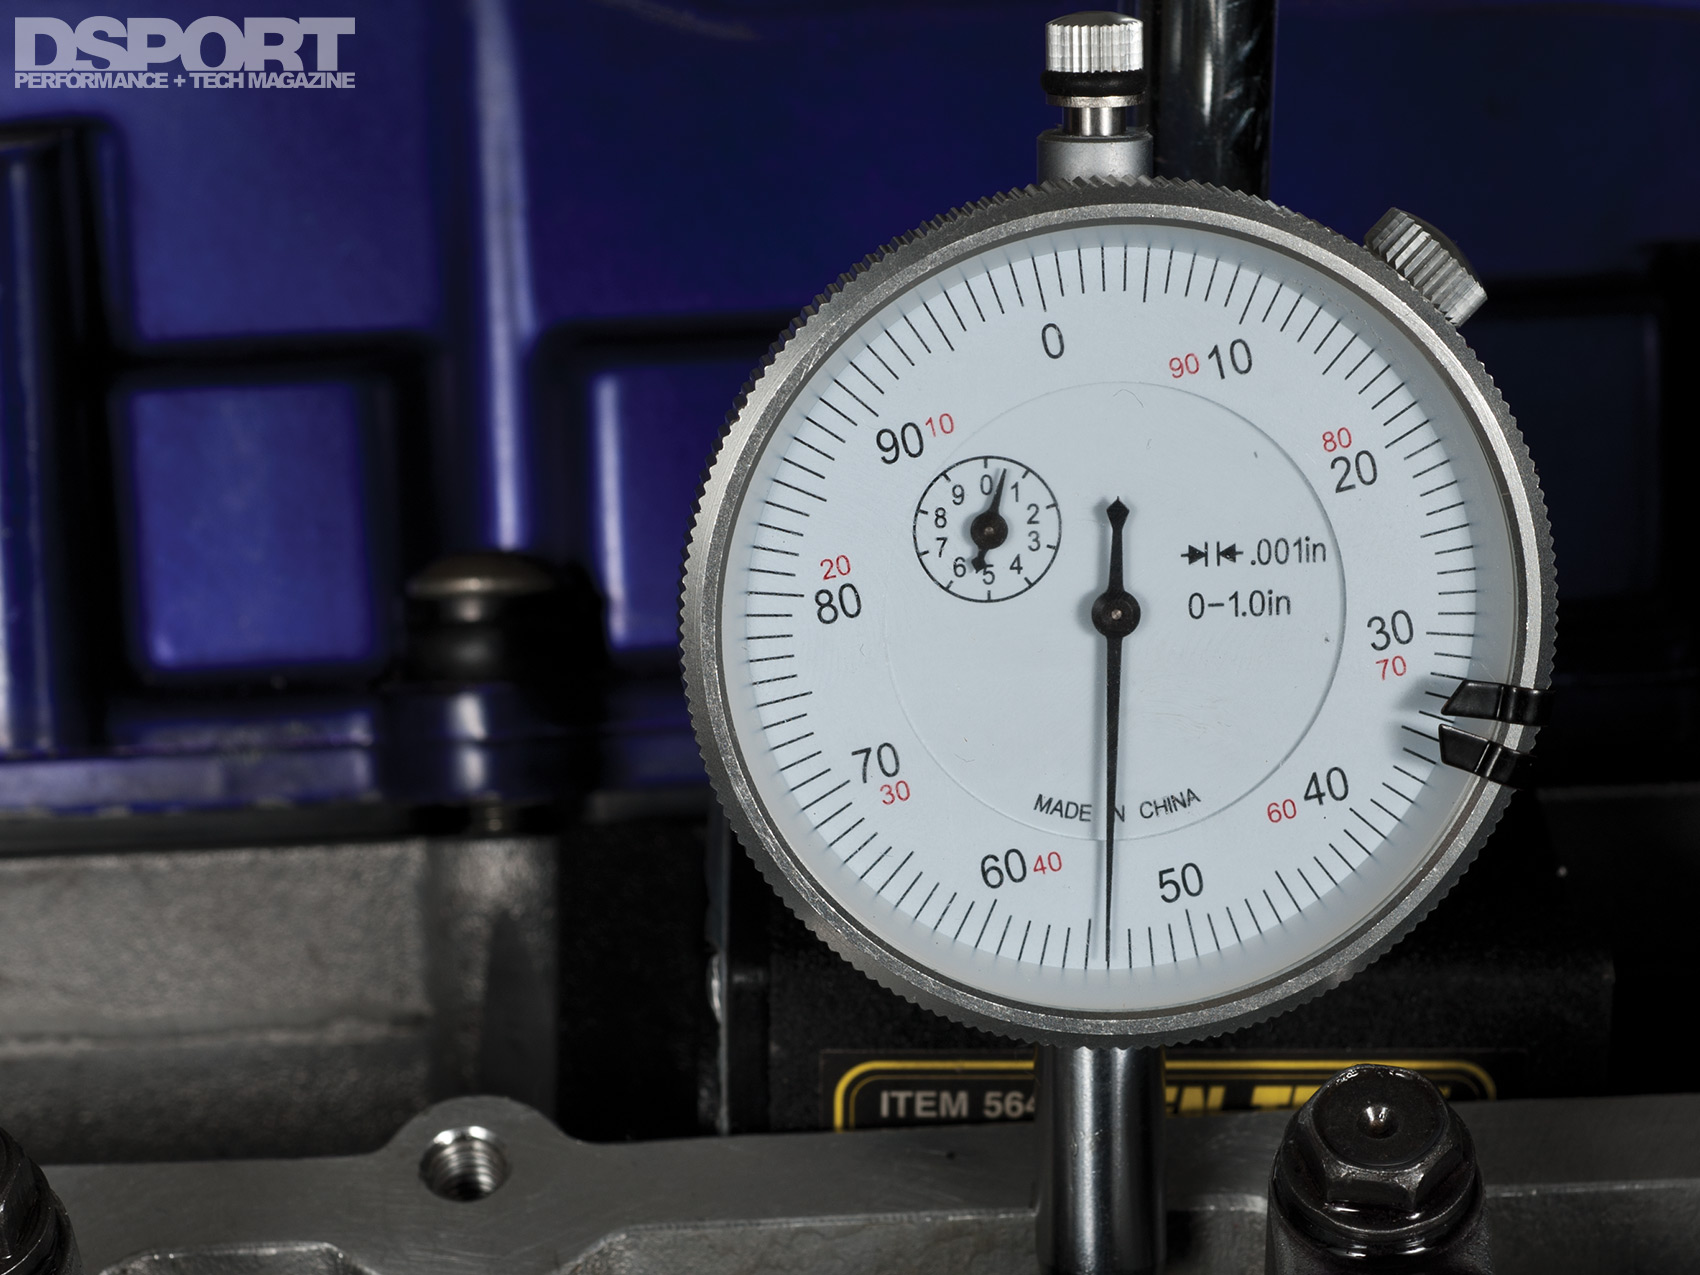 How to Choose the Best Interapid Dial Indicator for Your Needs